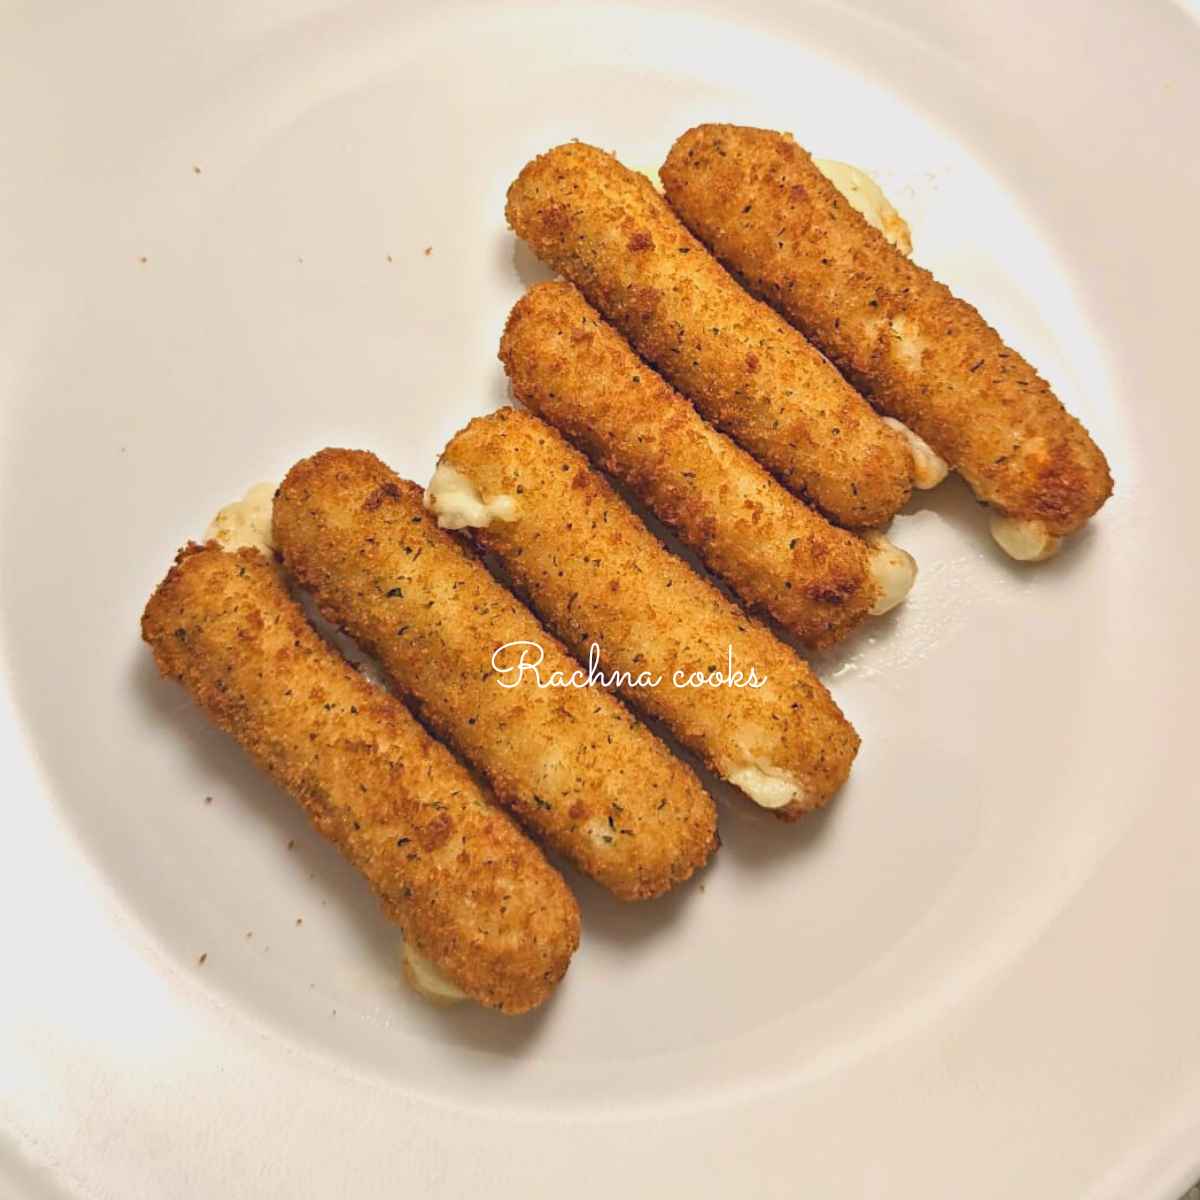 Mozzarella sticks after air frying served on a white plate.